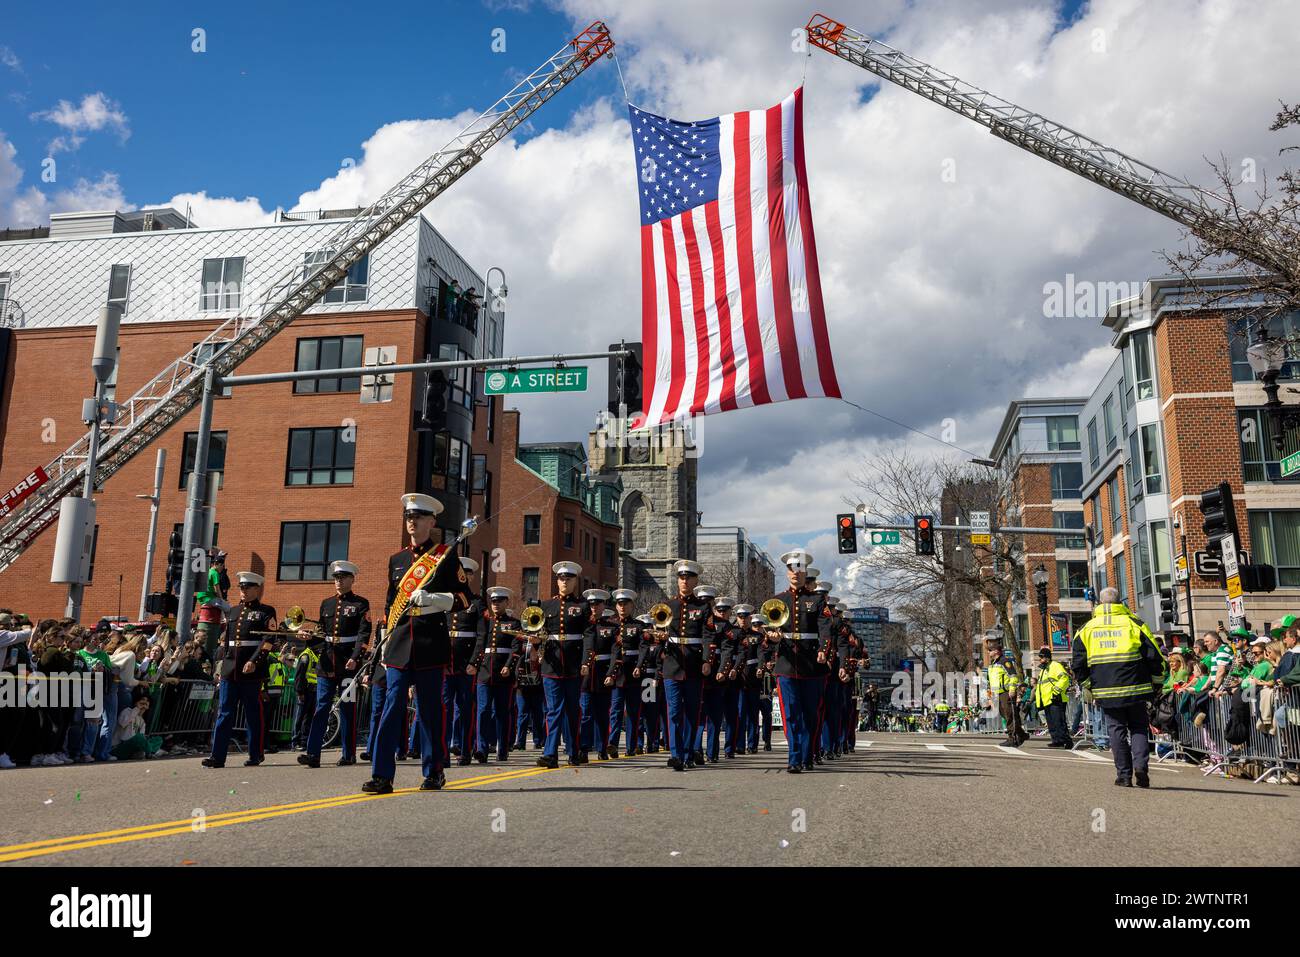 U.S. Marines with the Quantico Marine Corps Band perform at the South Boston St. Patrick’s Day Parade in Boston, Massachusetts, March 17, 2024. The Quantico Marine Corps Band provides musical support that fosters positive community relations, enhances troop morale, and promotes the Marine Corps recruiting program through events such as parades, concerts, and ceremonies. (U.S. Marine Corps photo by Lance Cpl. Joaquin Dela Torre) Stock Photo